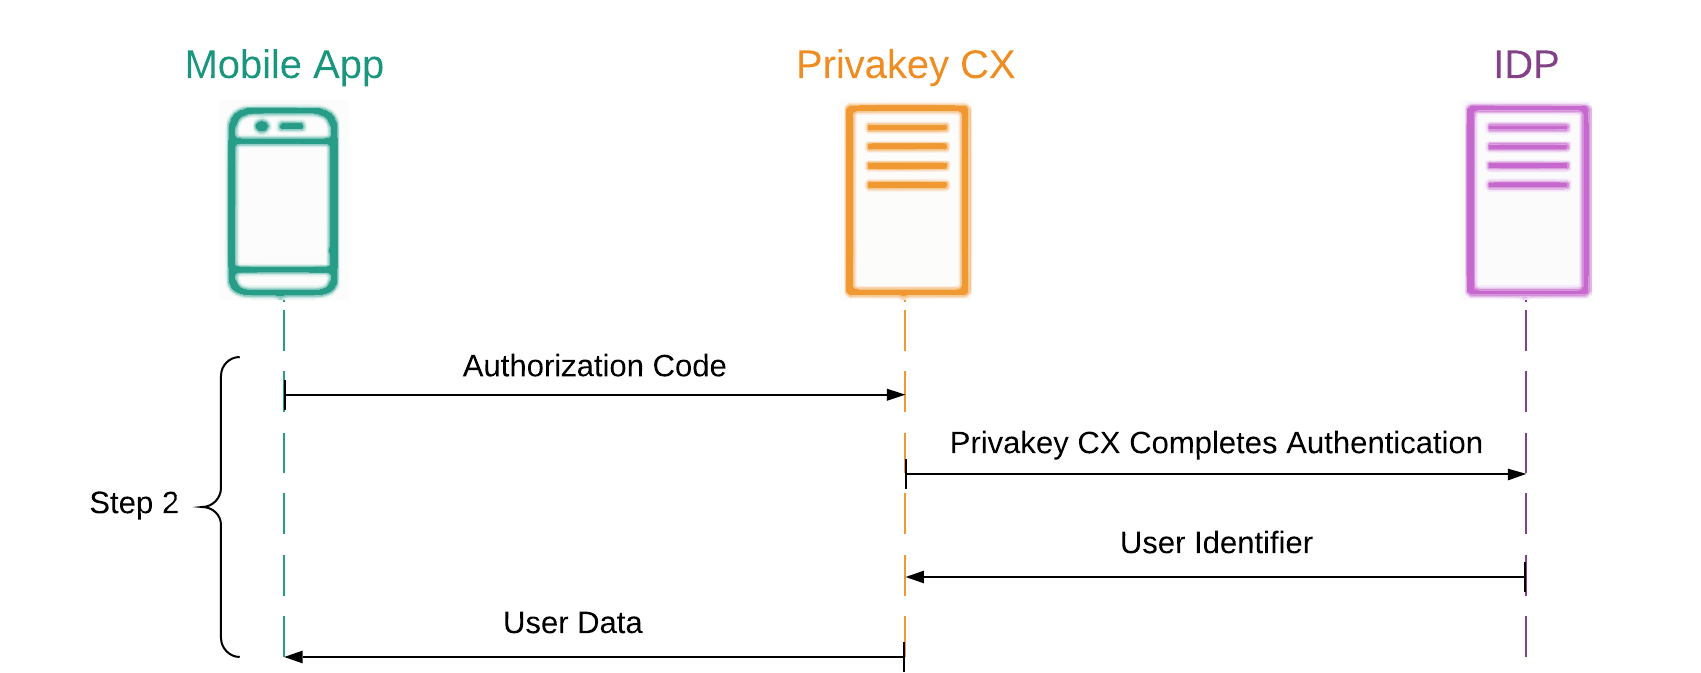 Figure 10: Privakey CX completes authentication on the user's behalf, and completes the bind process.